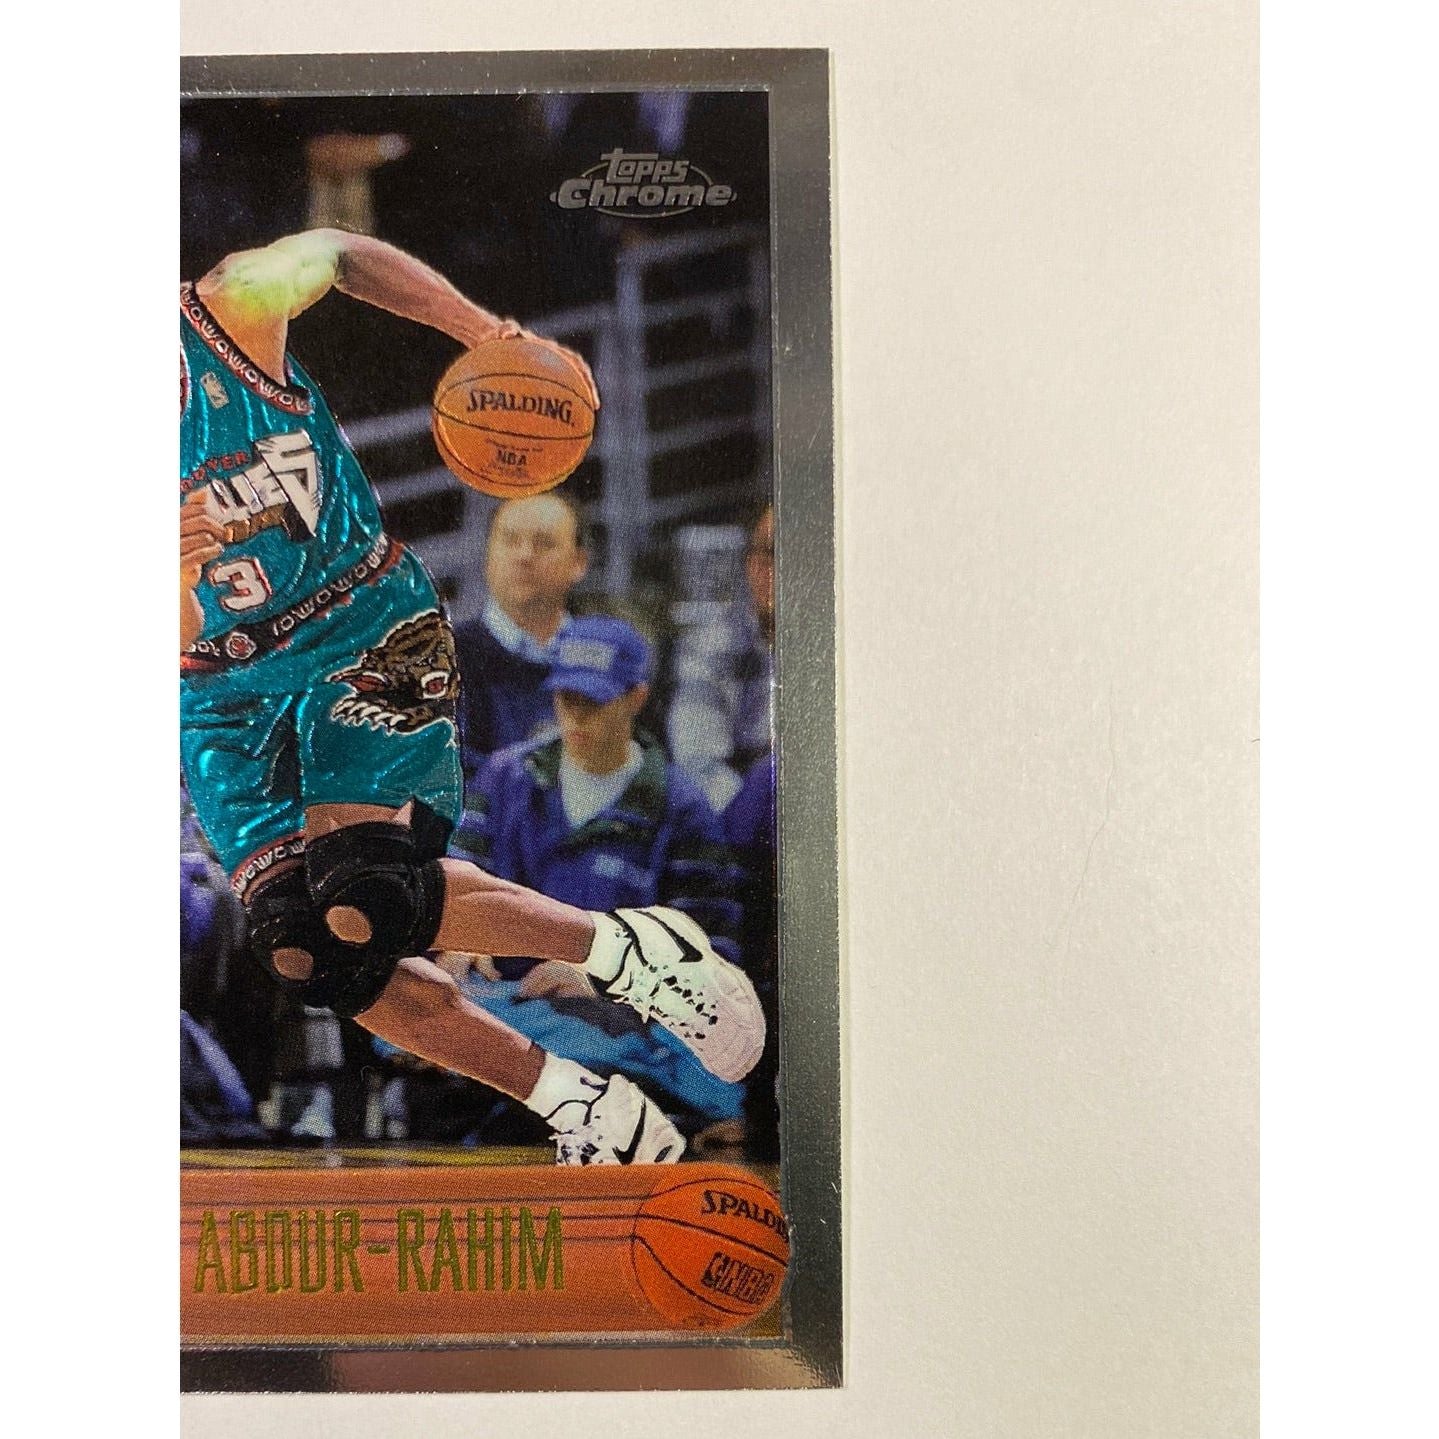  1996-97 Topps Chrome Shareef Abdur-Rahim RC  Local Legends Cards & Collectibles